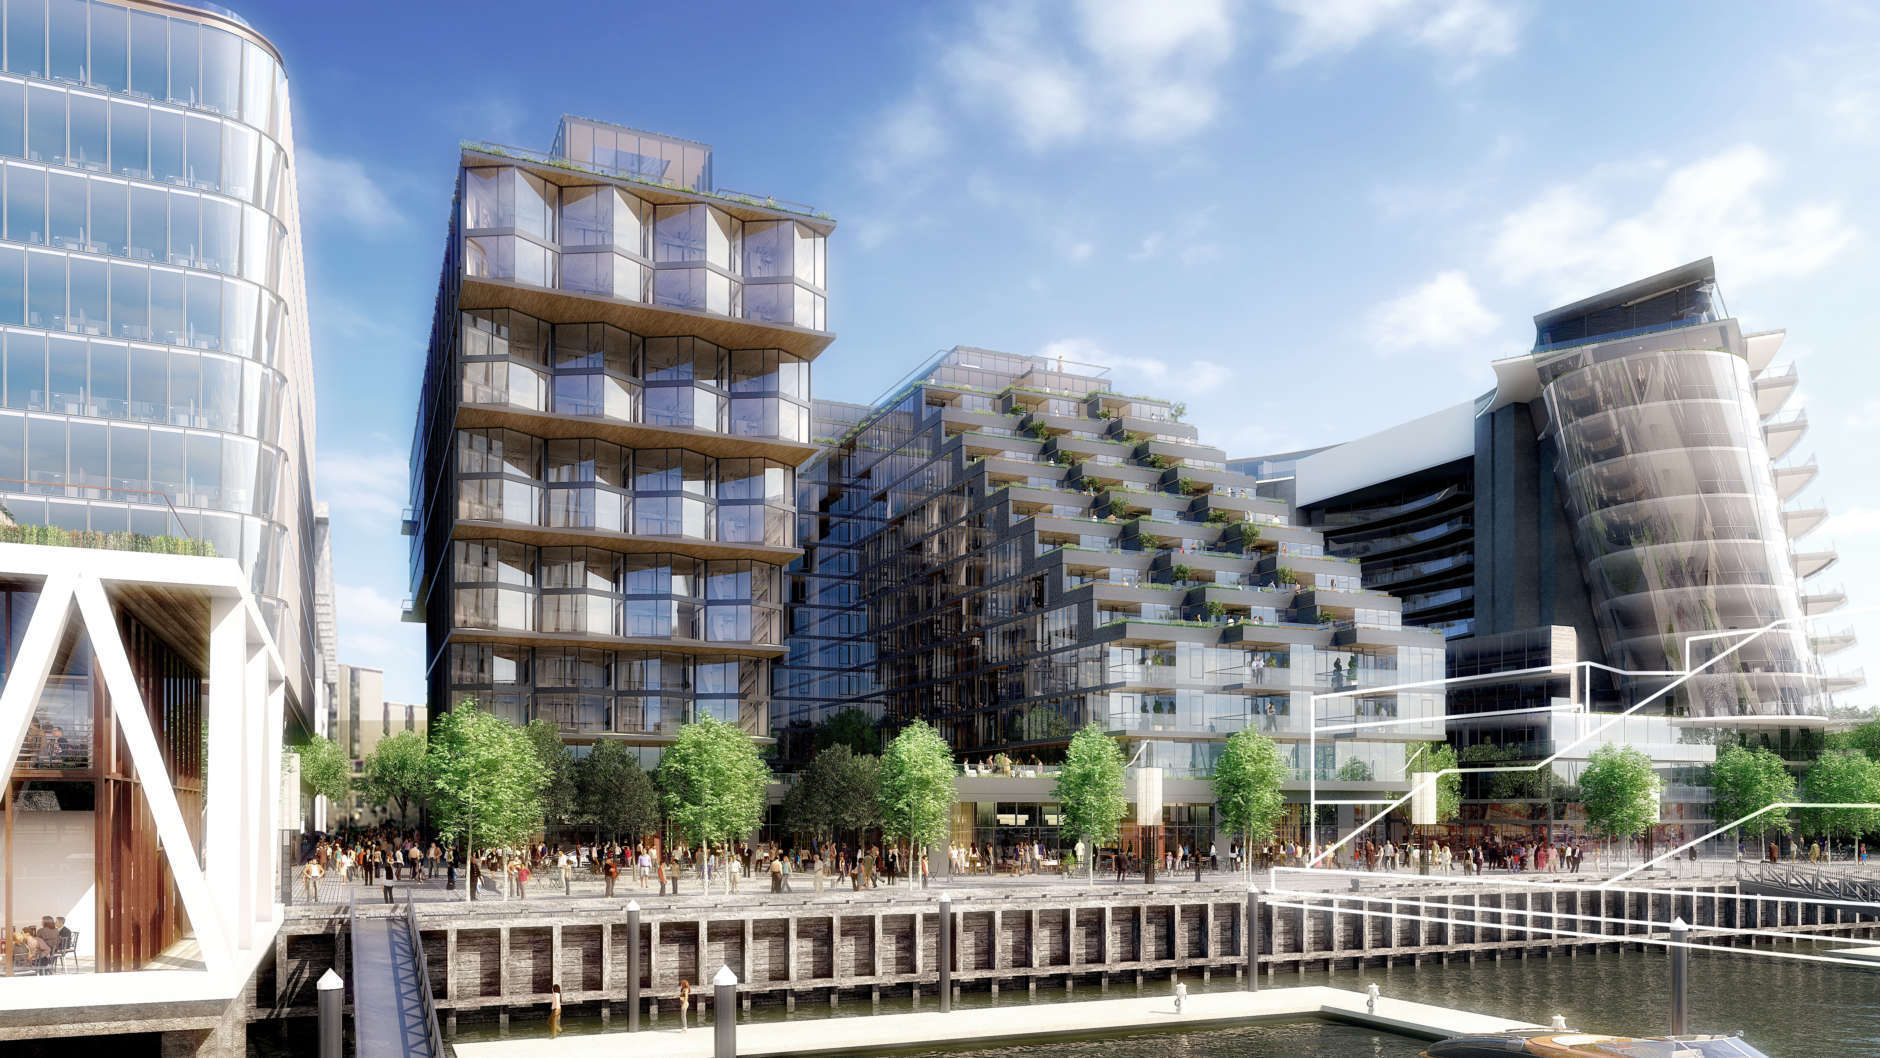 Plans for The Wharf's Phase II include over 300 residential units. (Courtesy PN Hoffman)